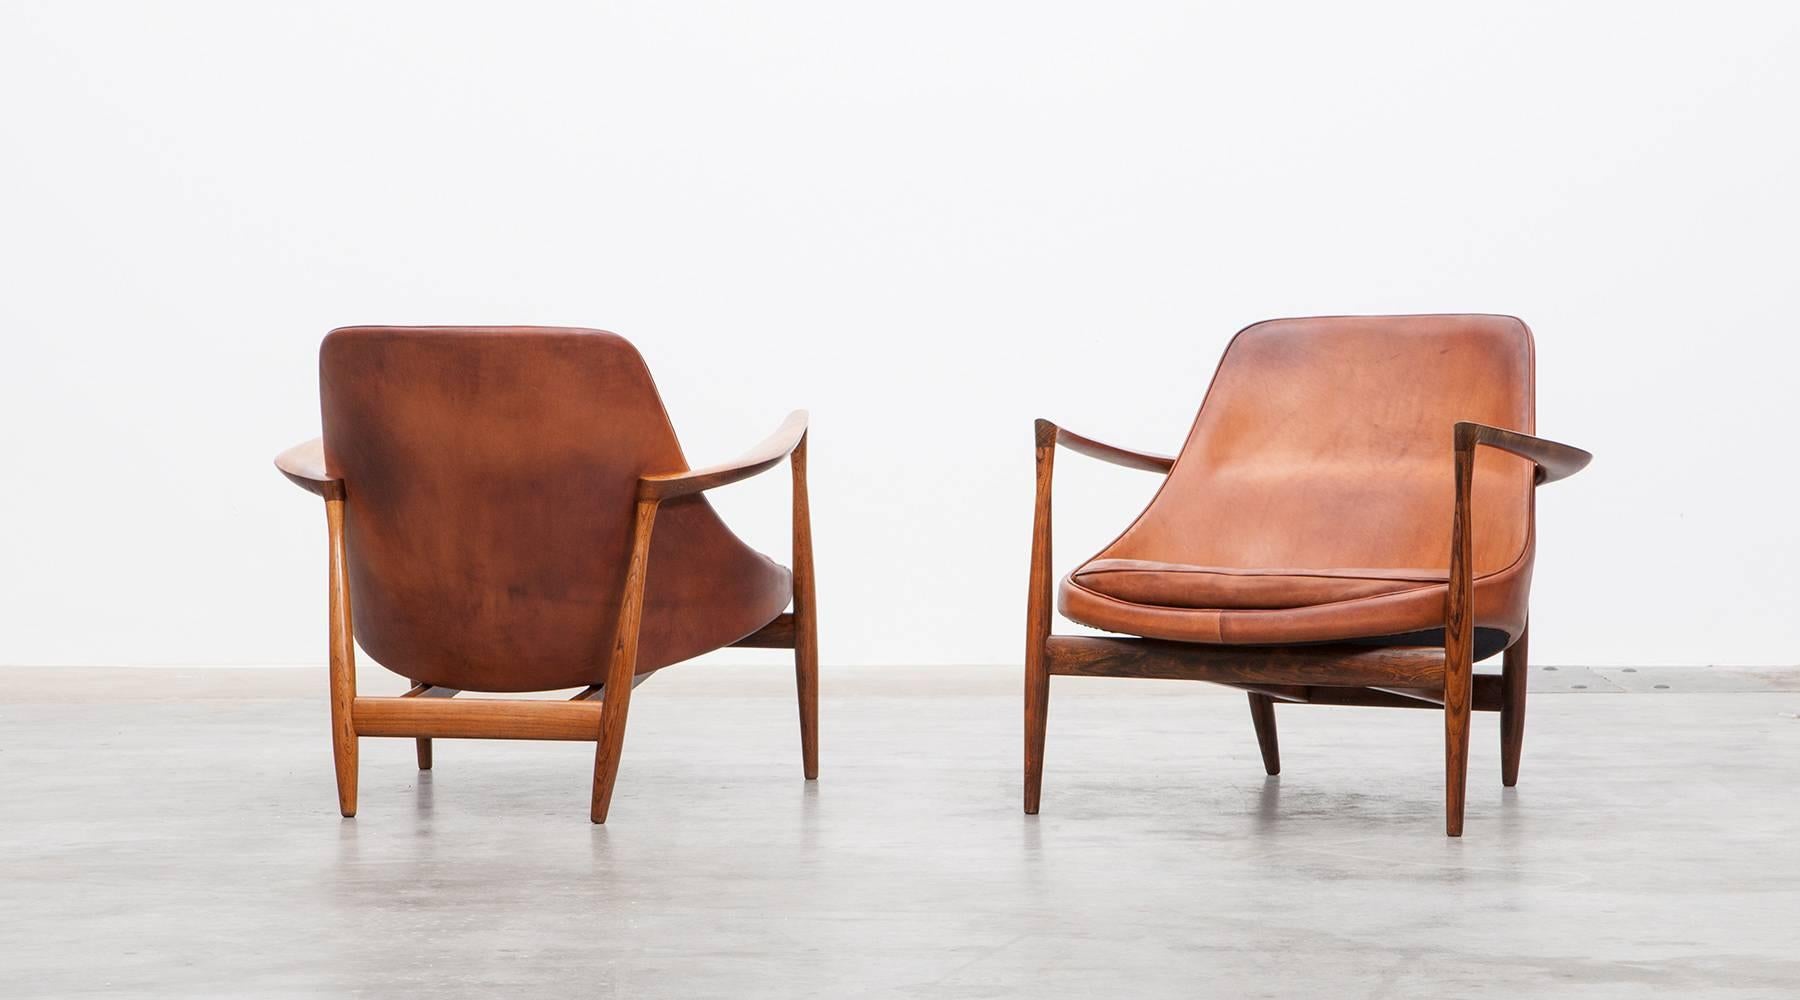 Wonderful examples of Ib Kofod-Larsen lounge chairs in wood with amazing patinated cognac leather. The lounge chairs were created in 1956. Manufactured by Christensen & Larsen.